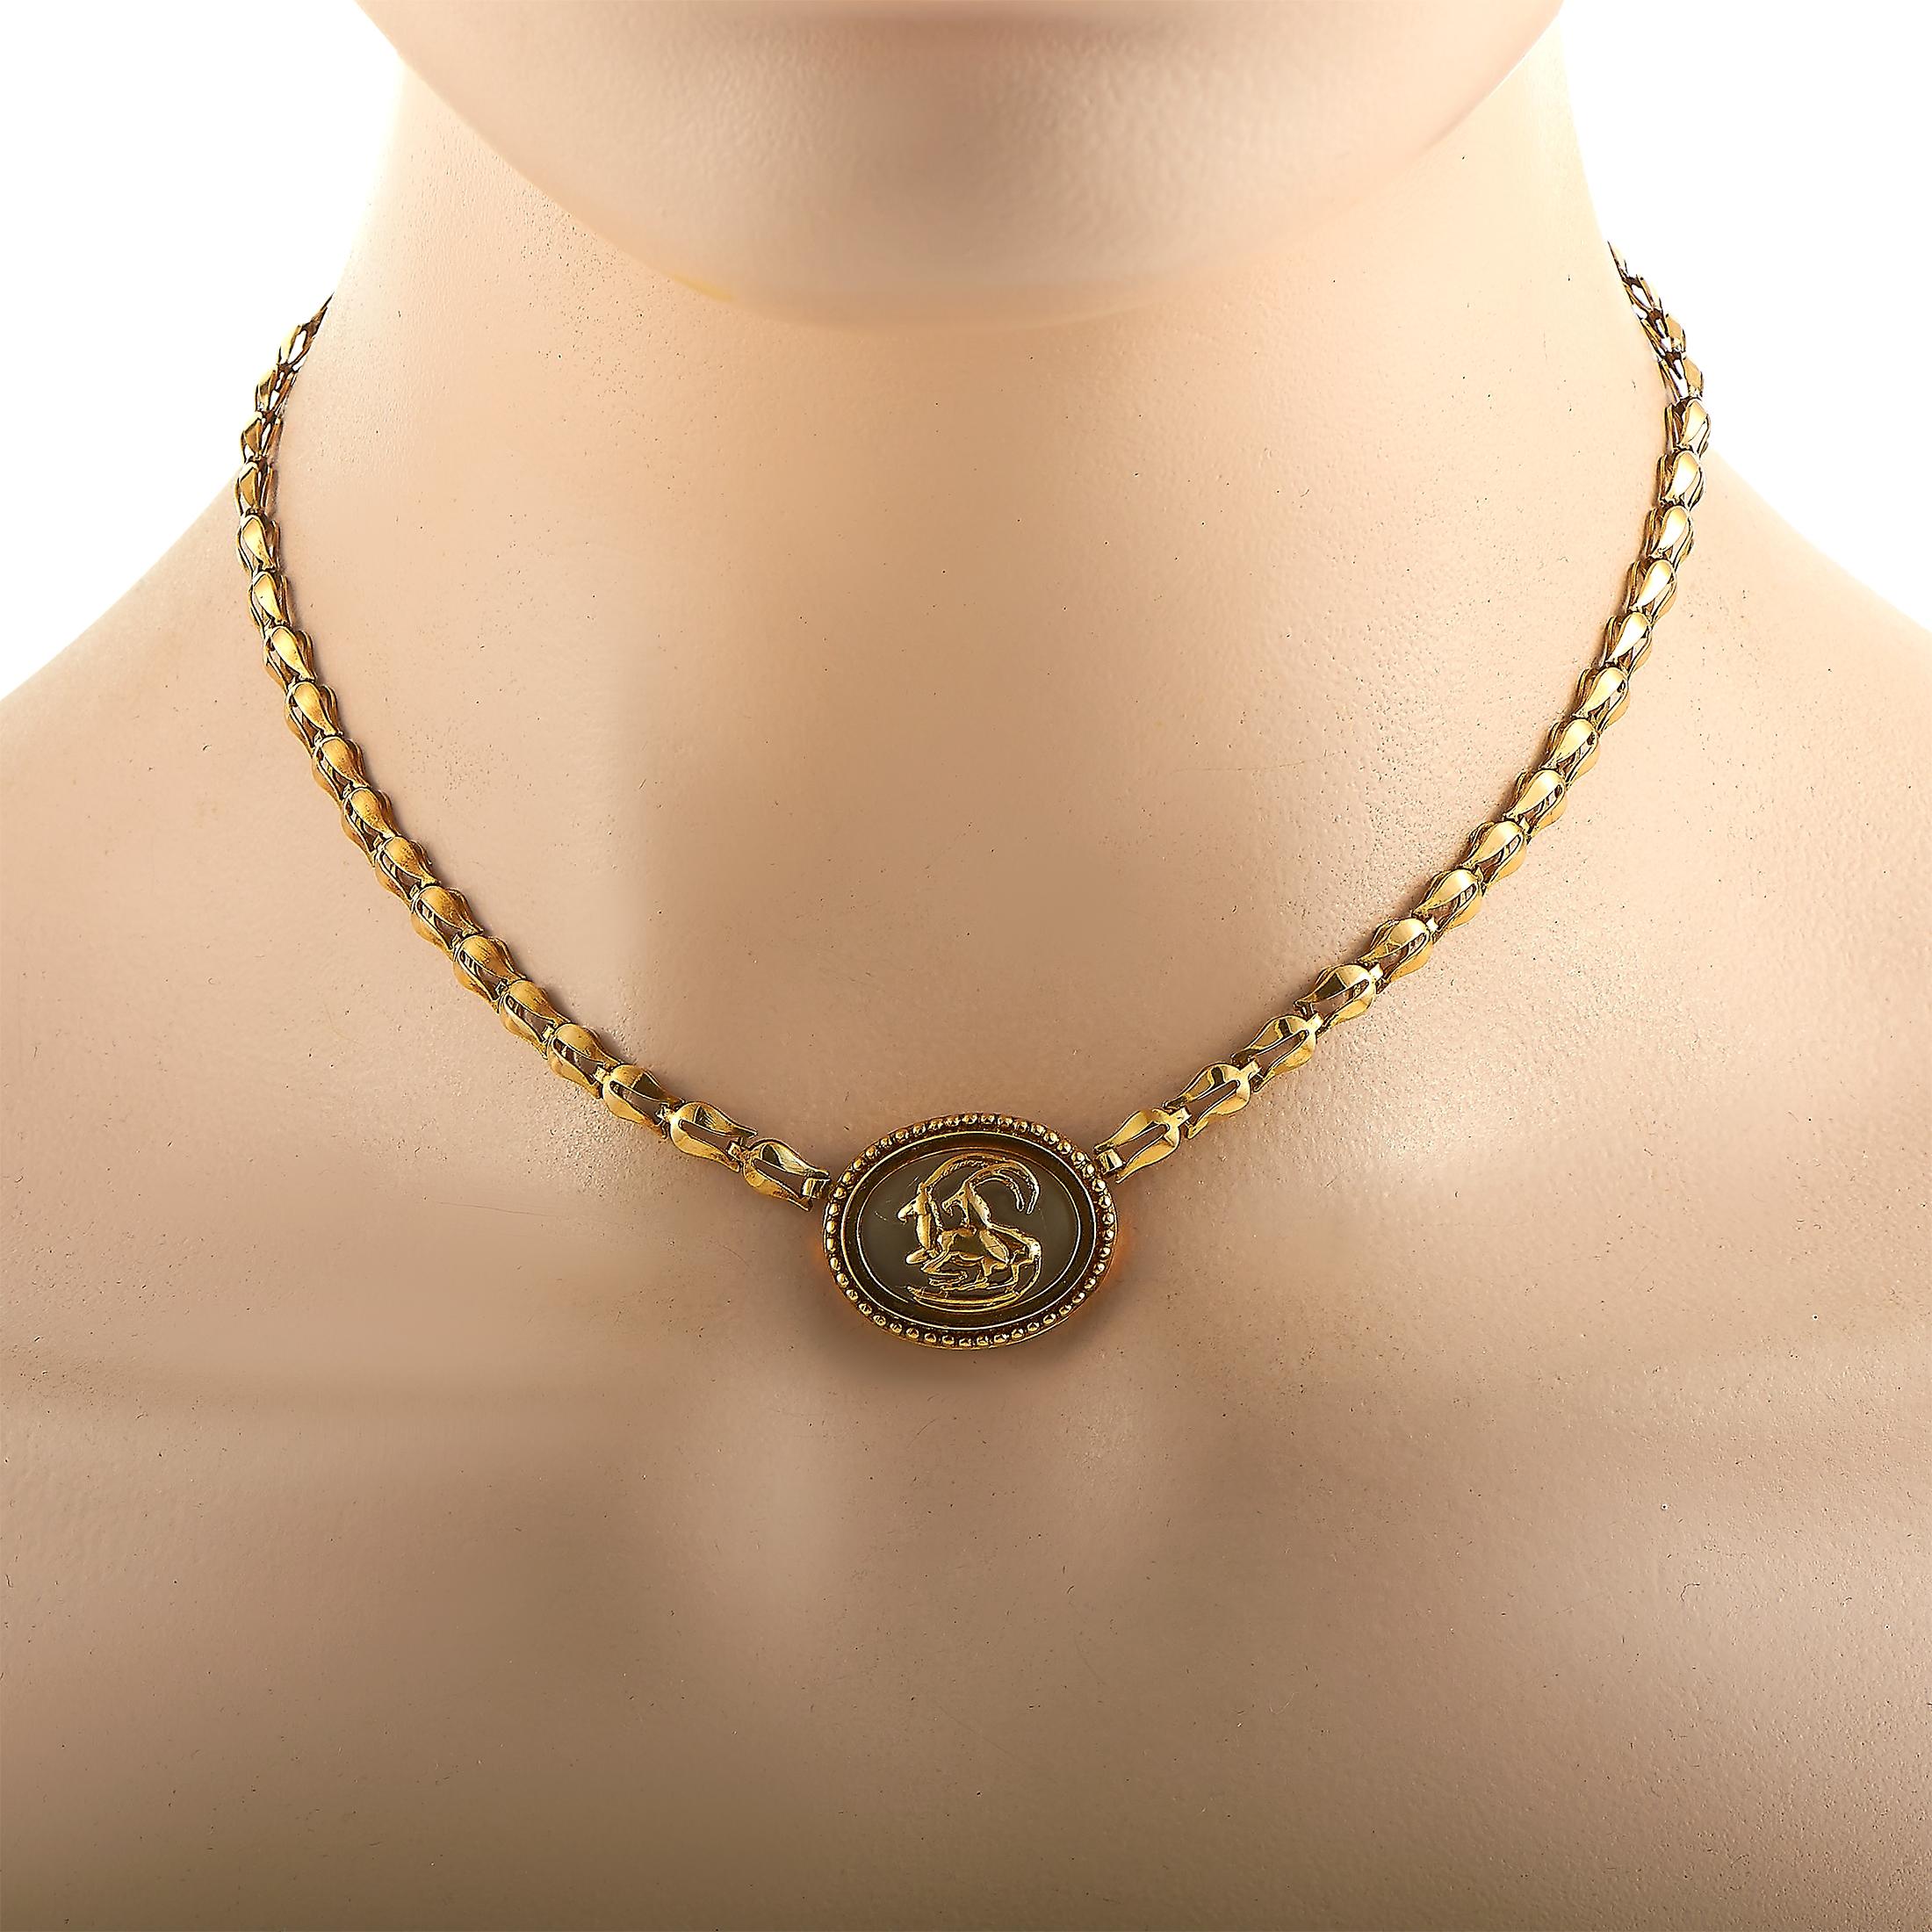 This Ilias Lalaounis necklace is made out of 18K yellow gold and crystal and weighs 20.4 grams. It is presented with a 14” chain onto which a pendant is attached, boasting a wild goats motif and measuring 0.75” in length and 1” in width.
 
 The